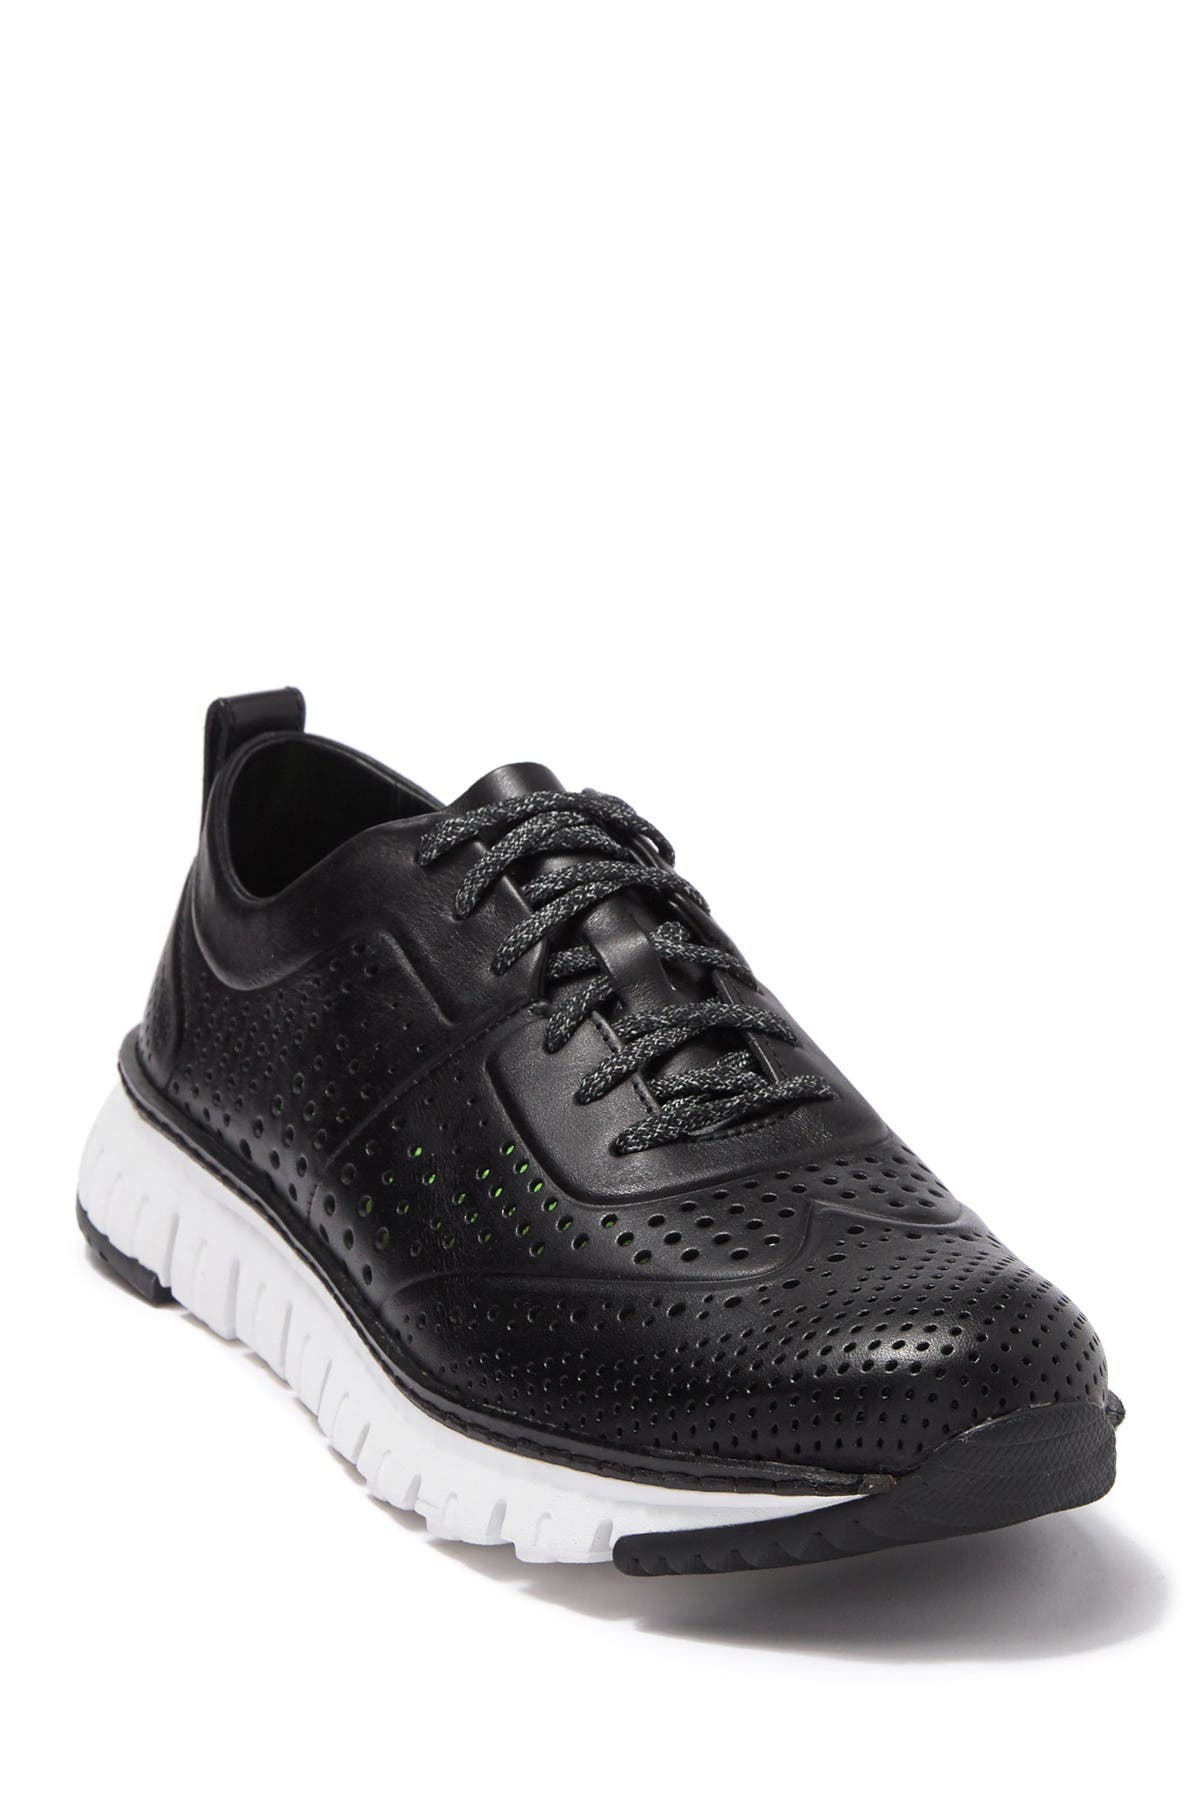 cole haan zerogrand perforated